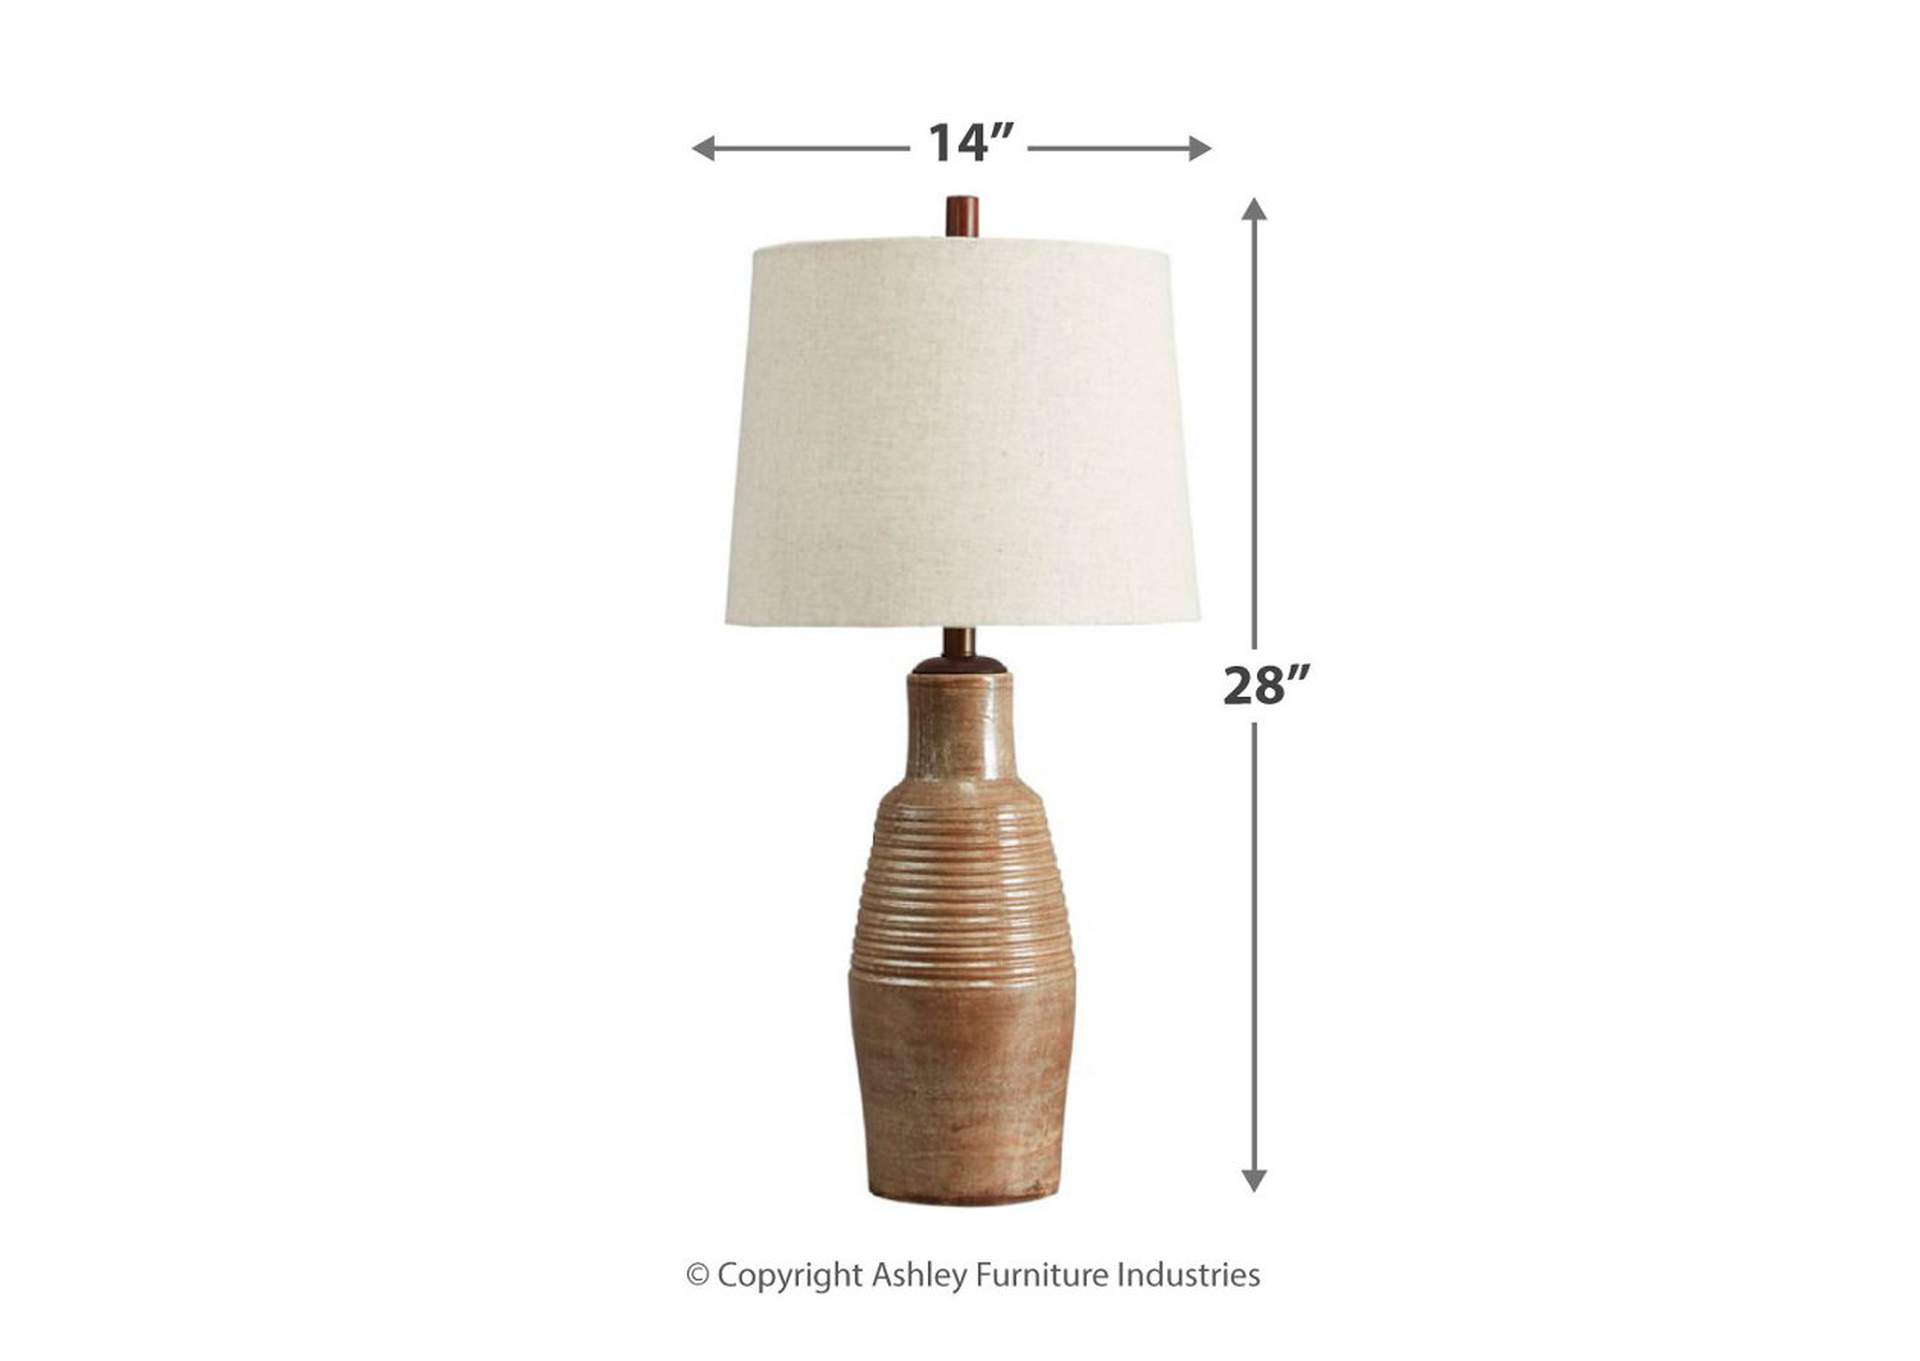 Calixto Table Lamp,Signature Design By Ashley